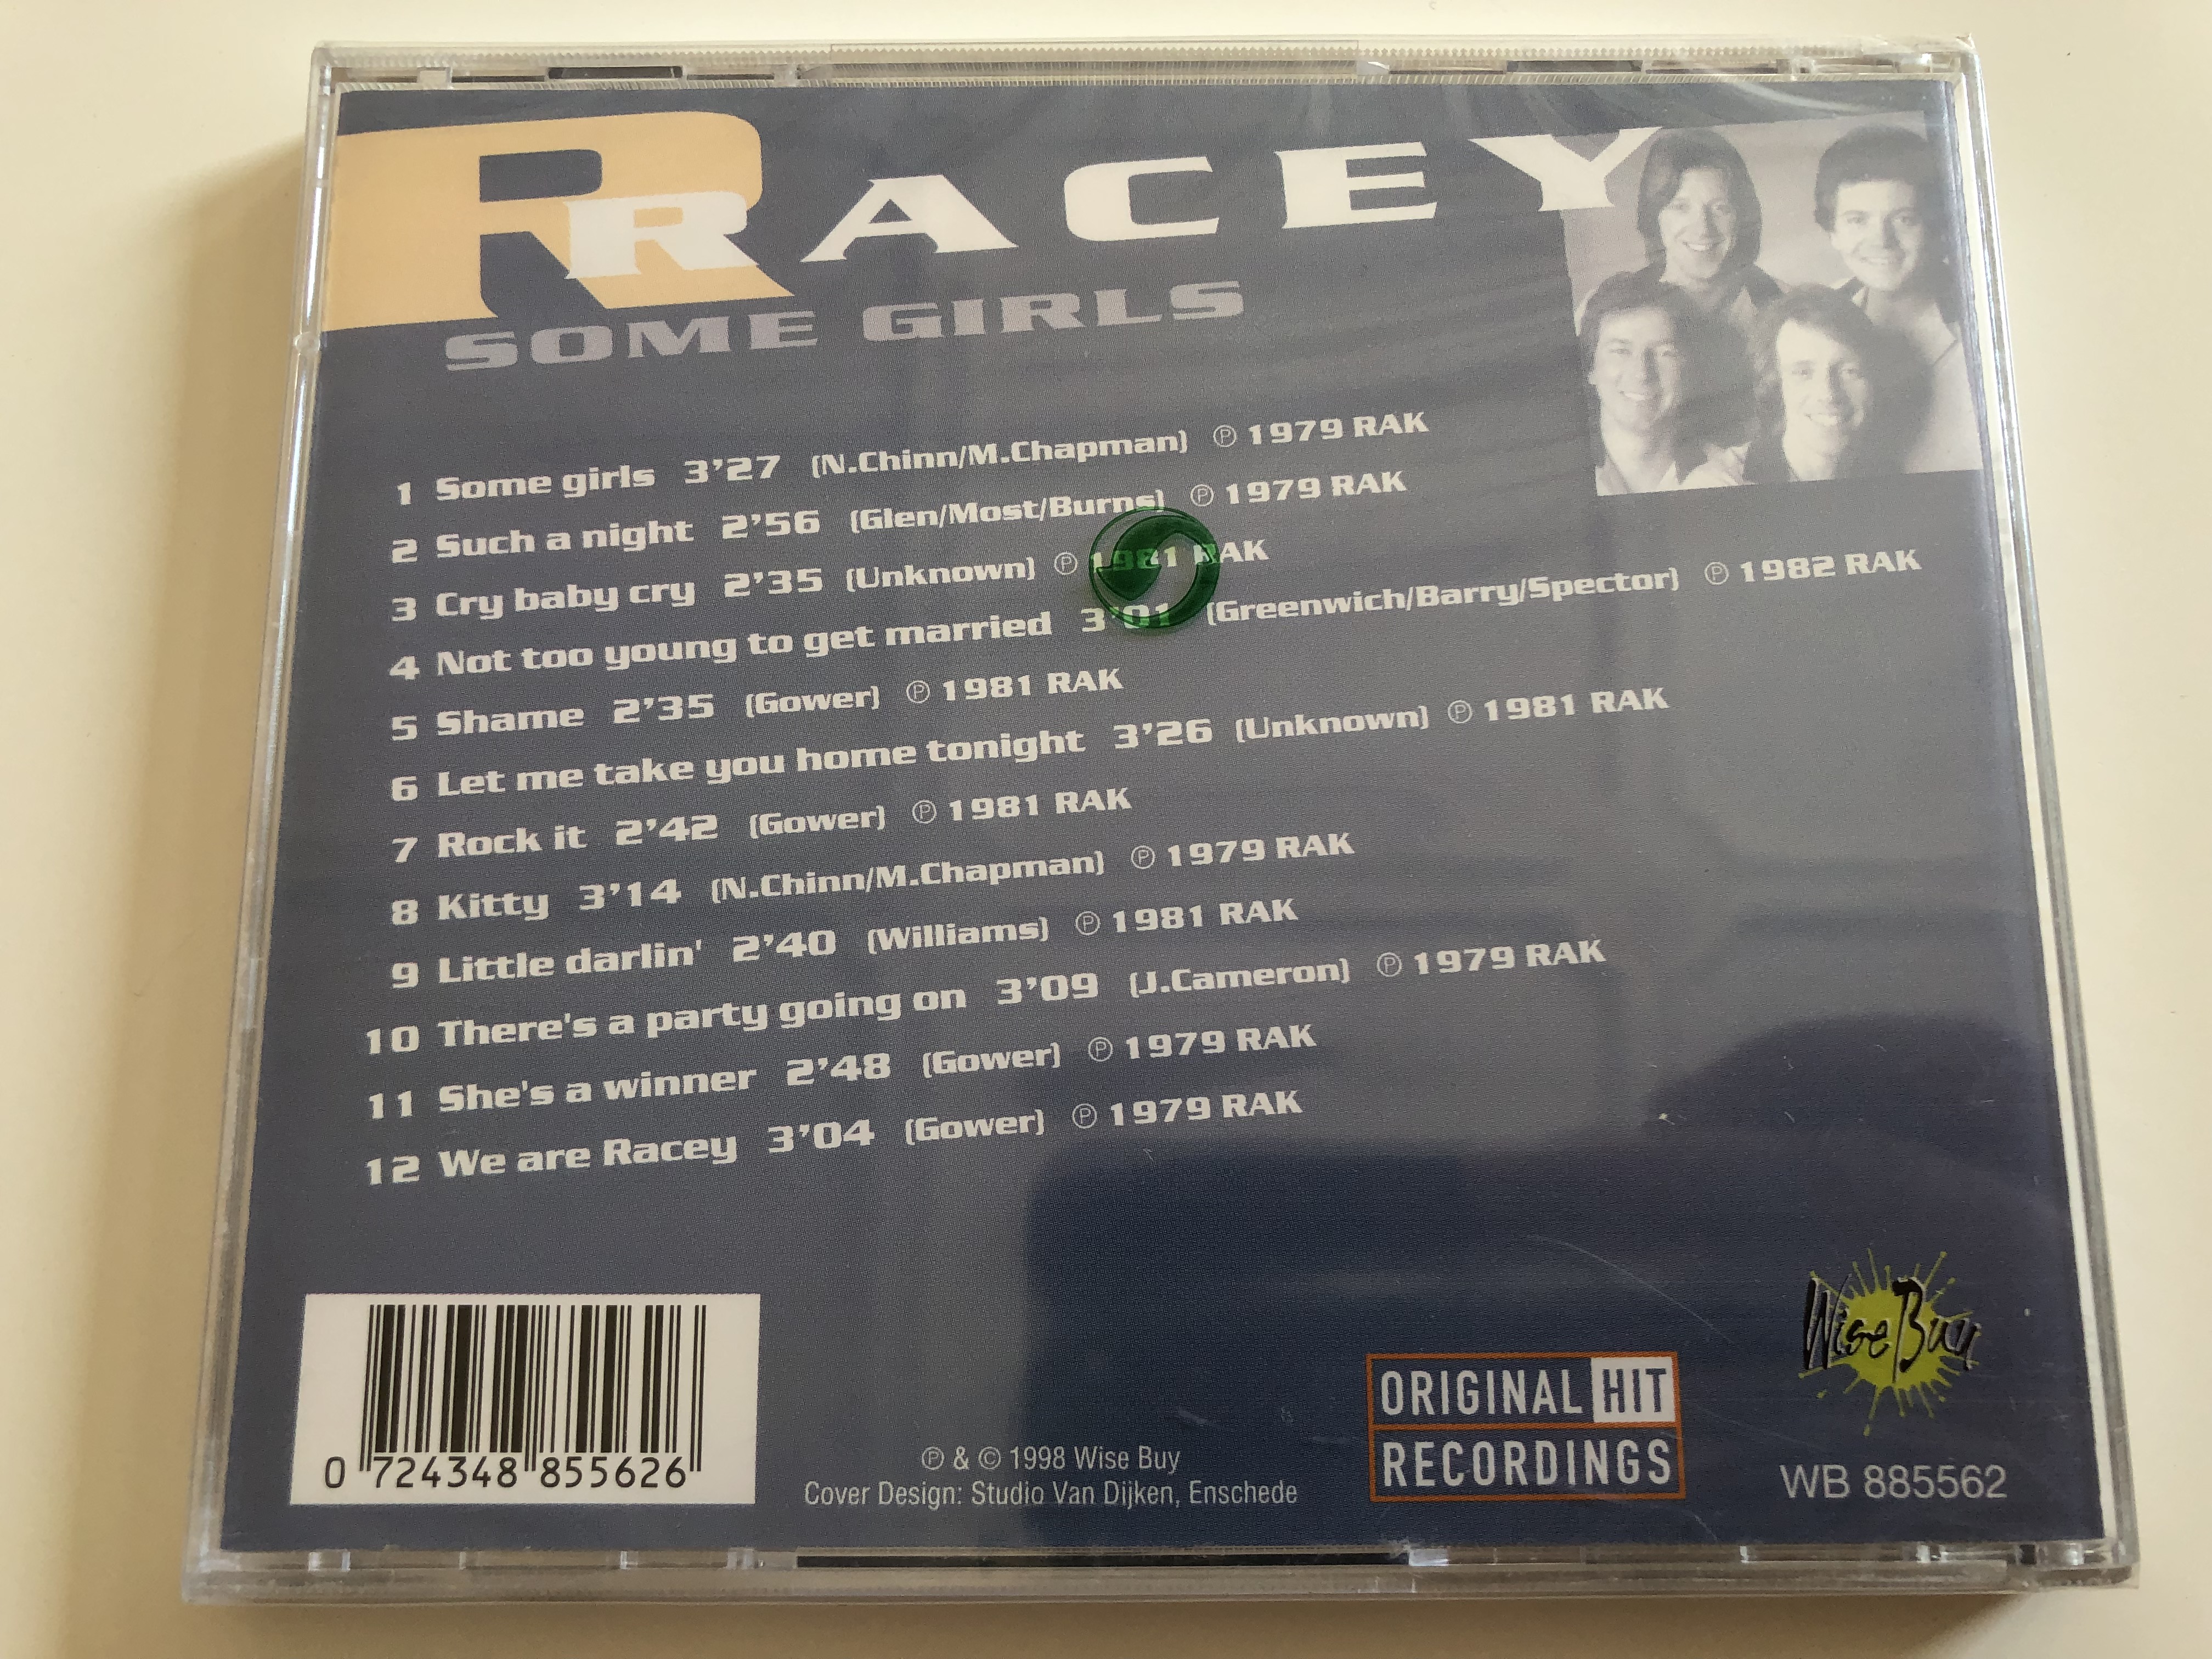 racey-some-girls-there-s-a-party-going-on-not-too-young-to-get-married-such-a-night-we-are-racey-wise-buy-audio-cd-1998-wb-885562-2-.jpg